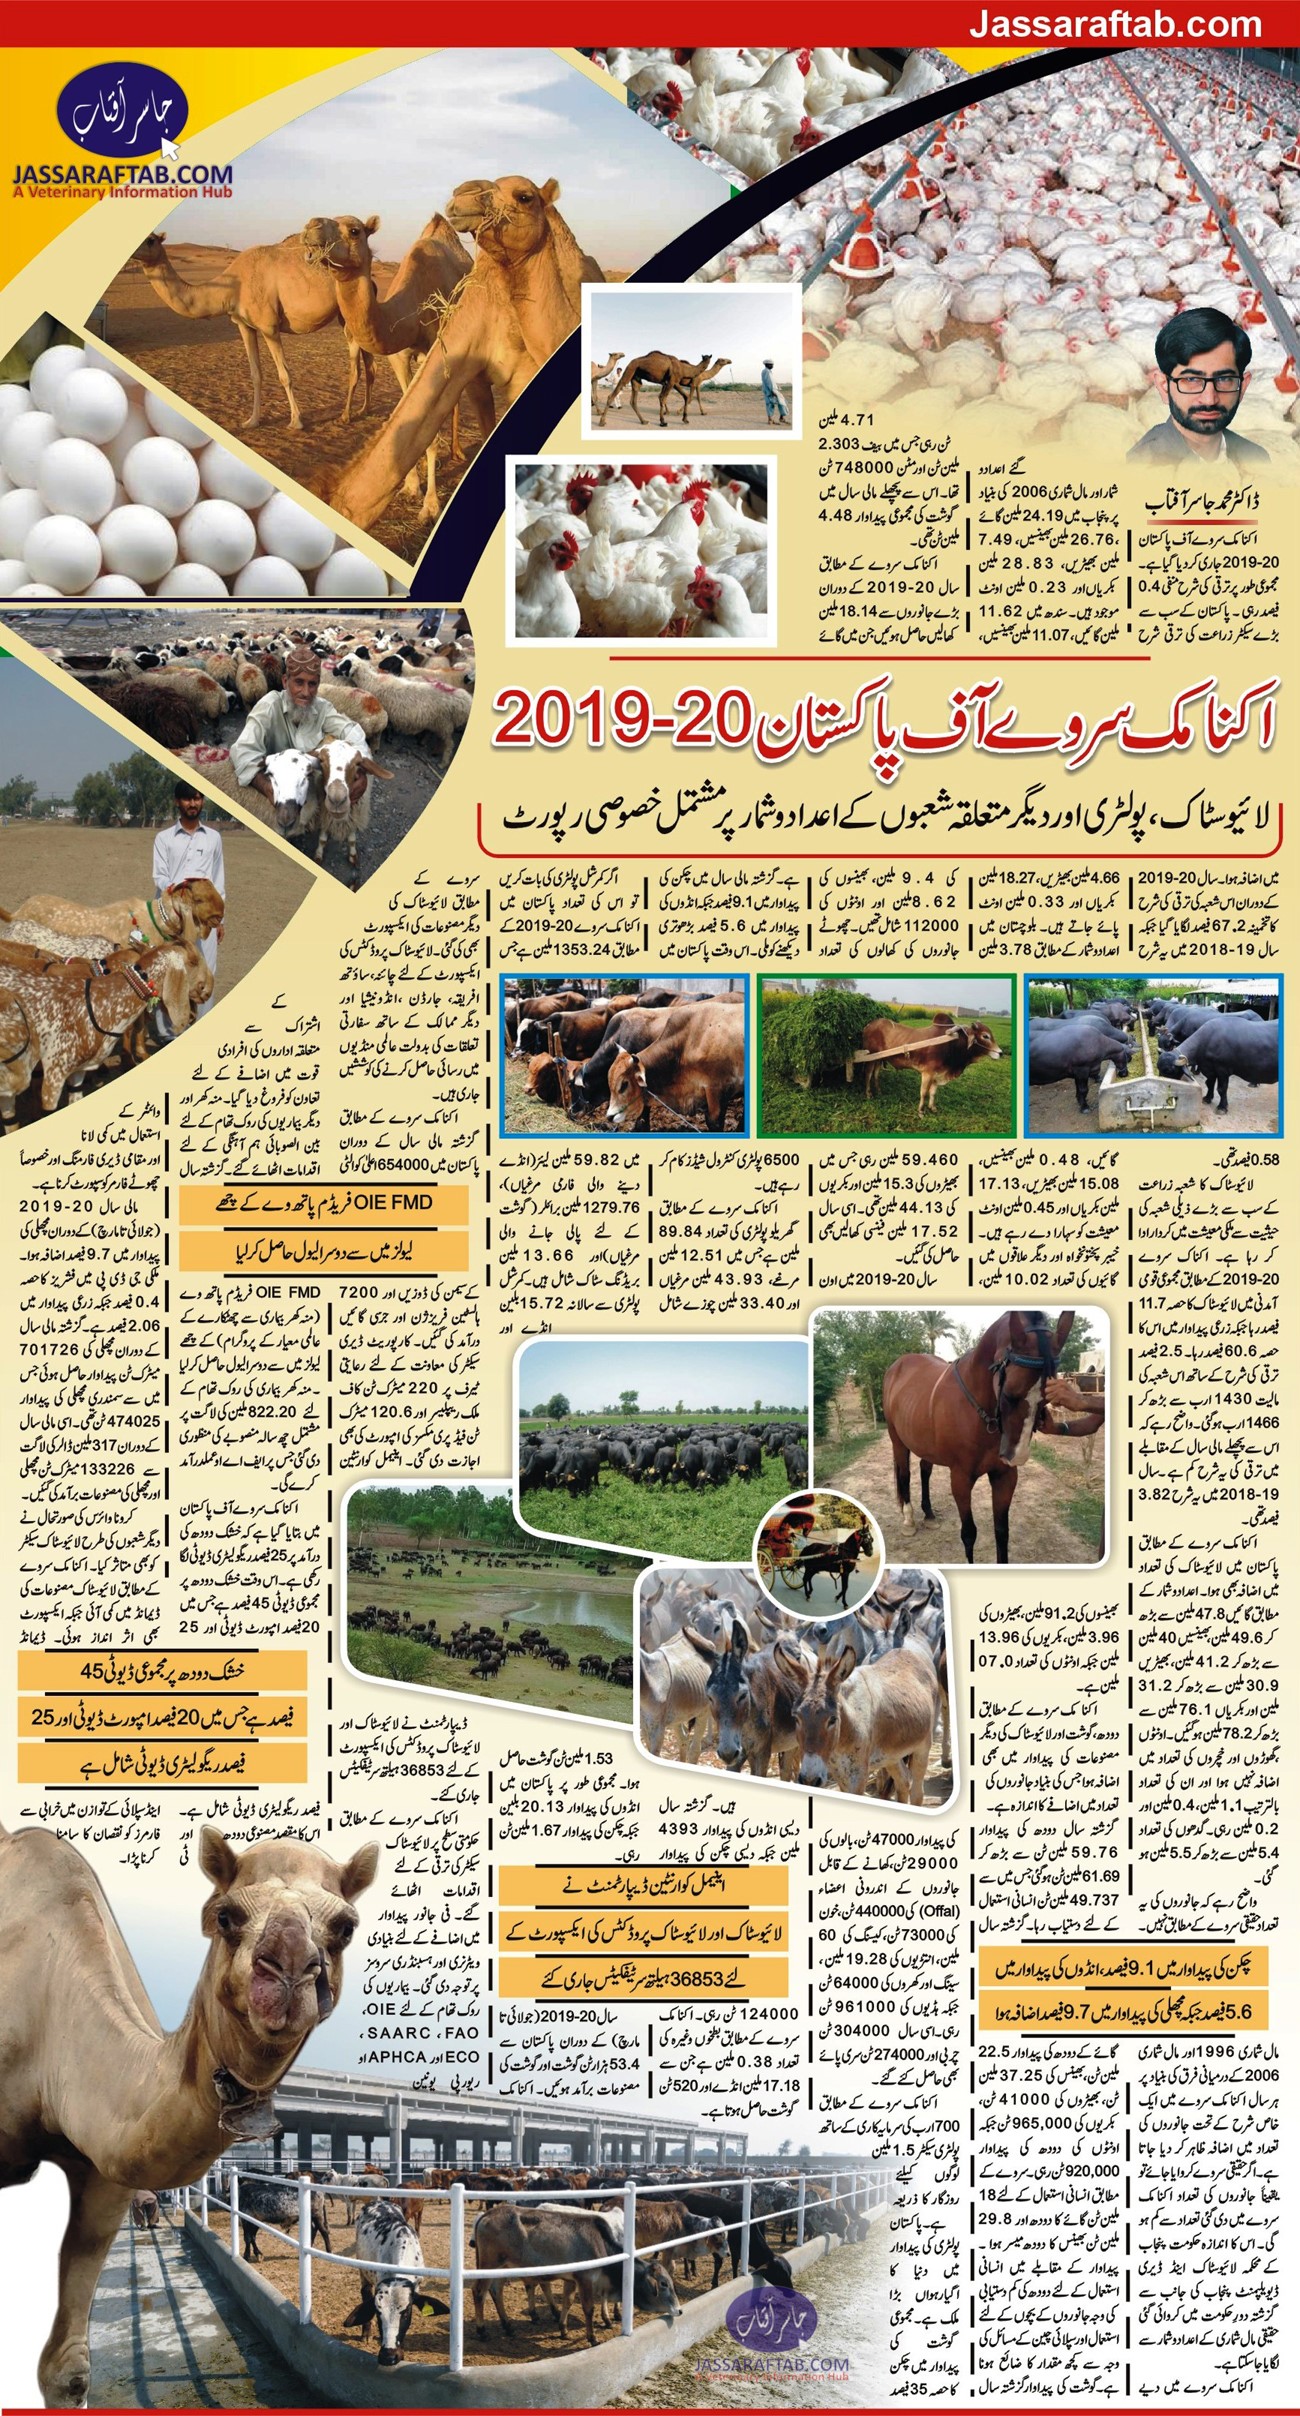 Milk production in Pakistan, meat production in Pakistan. poultry data and poultry industry statistics.